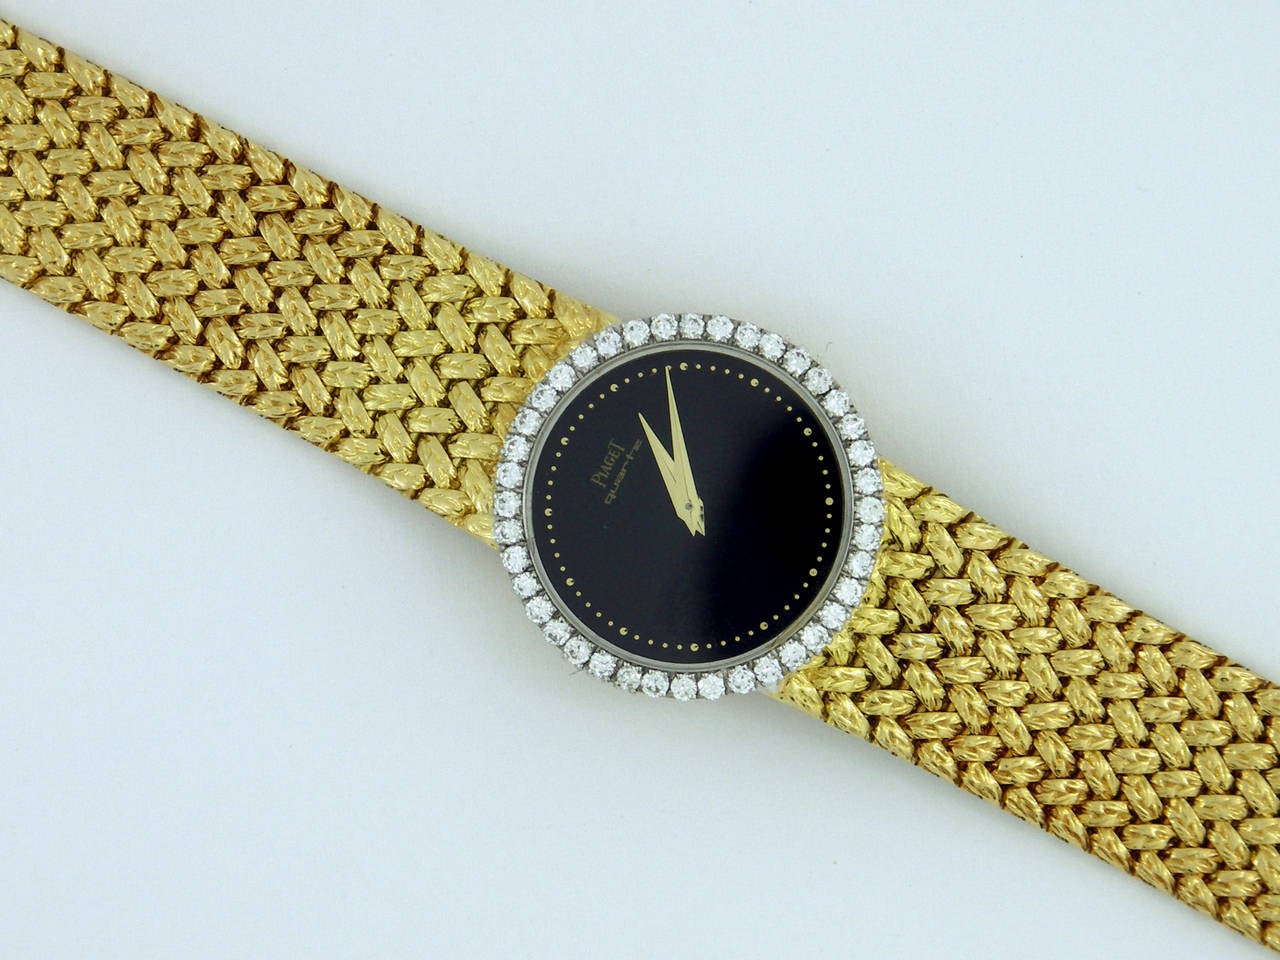 A striking 18K yellow gold Piaget lady's watch. This fabulous timepiece features an onyx dial with gold lettering and markers. Surrounding the dial is a 25mm bezel set with a total of approximately 1 ct of round brilliant-cut diamonds. Diamonds are